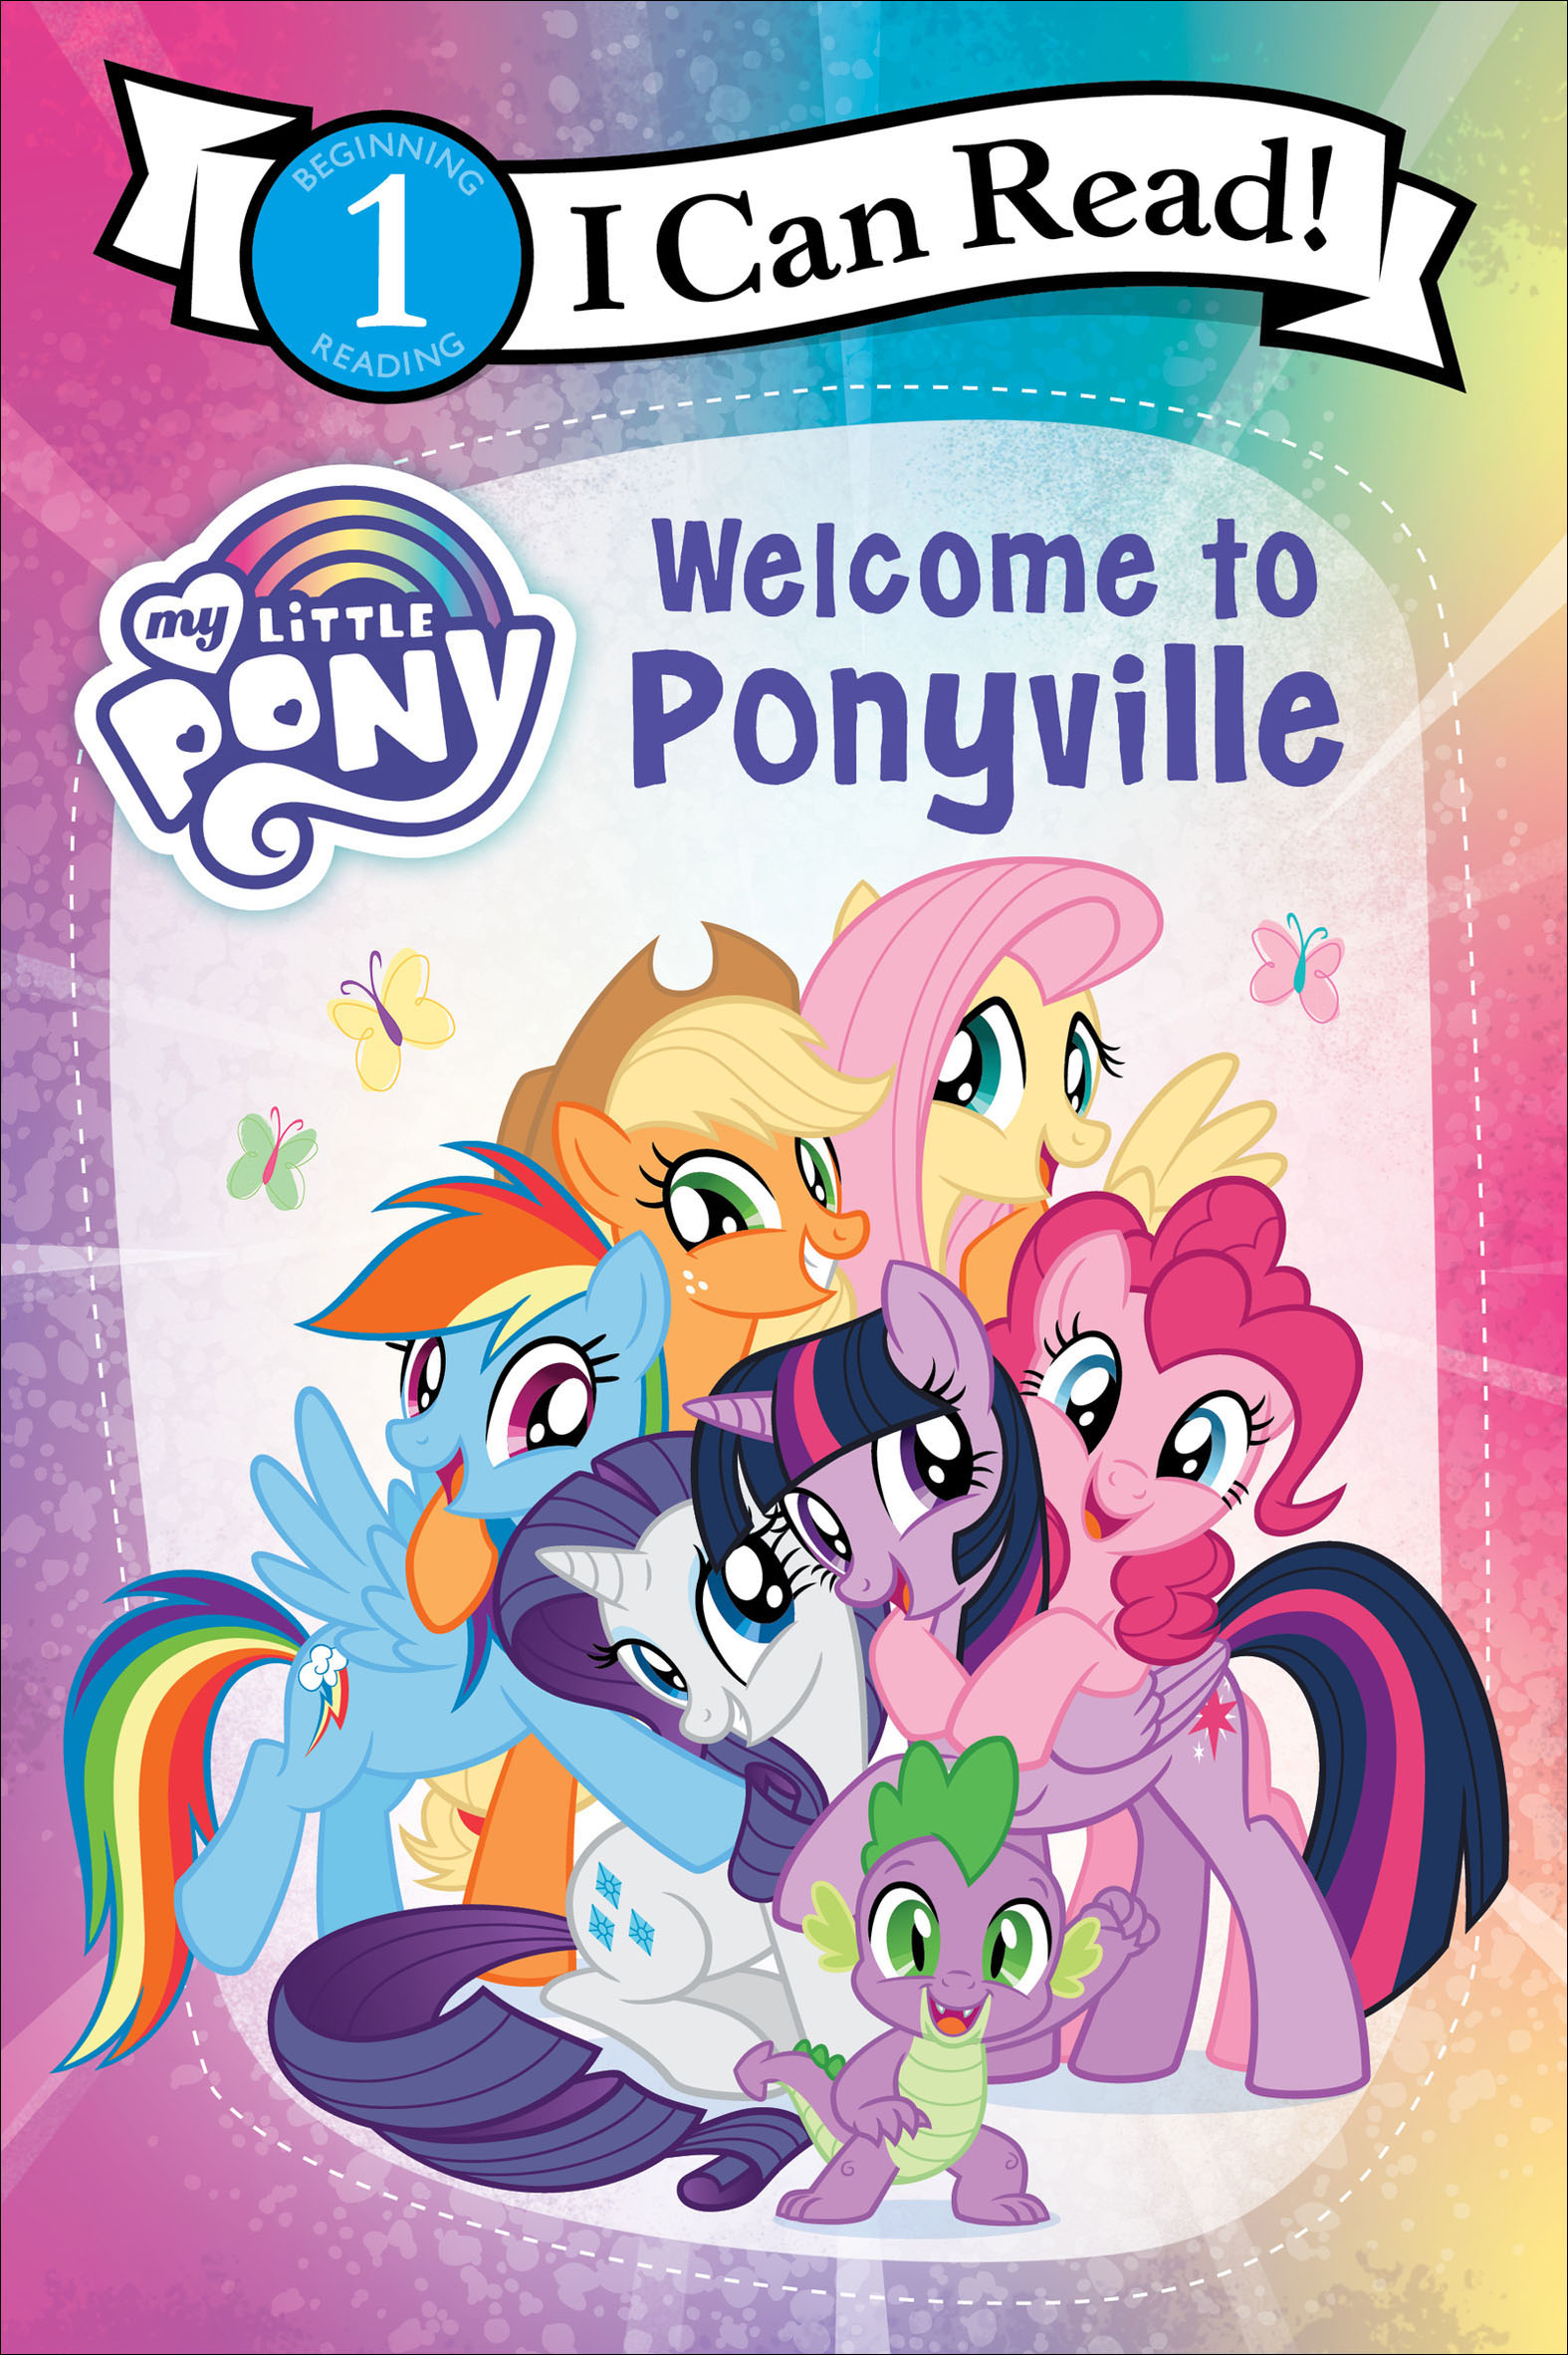 My Little Pony: Welcome to Ponyville cover image